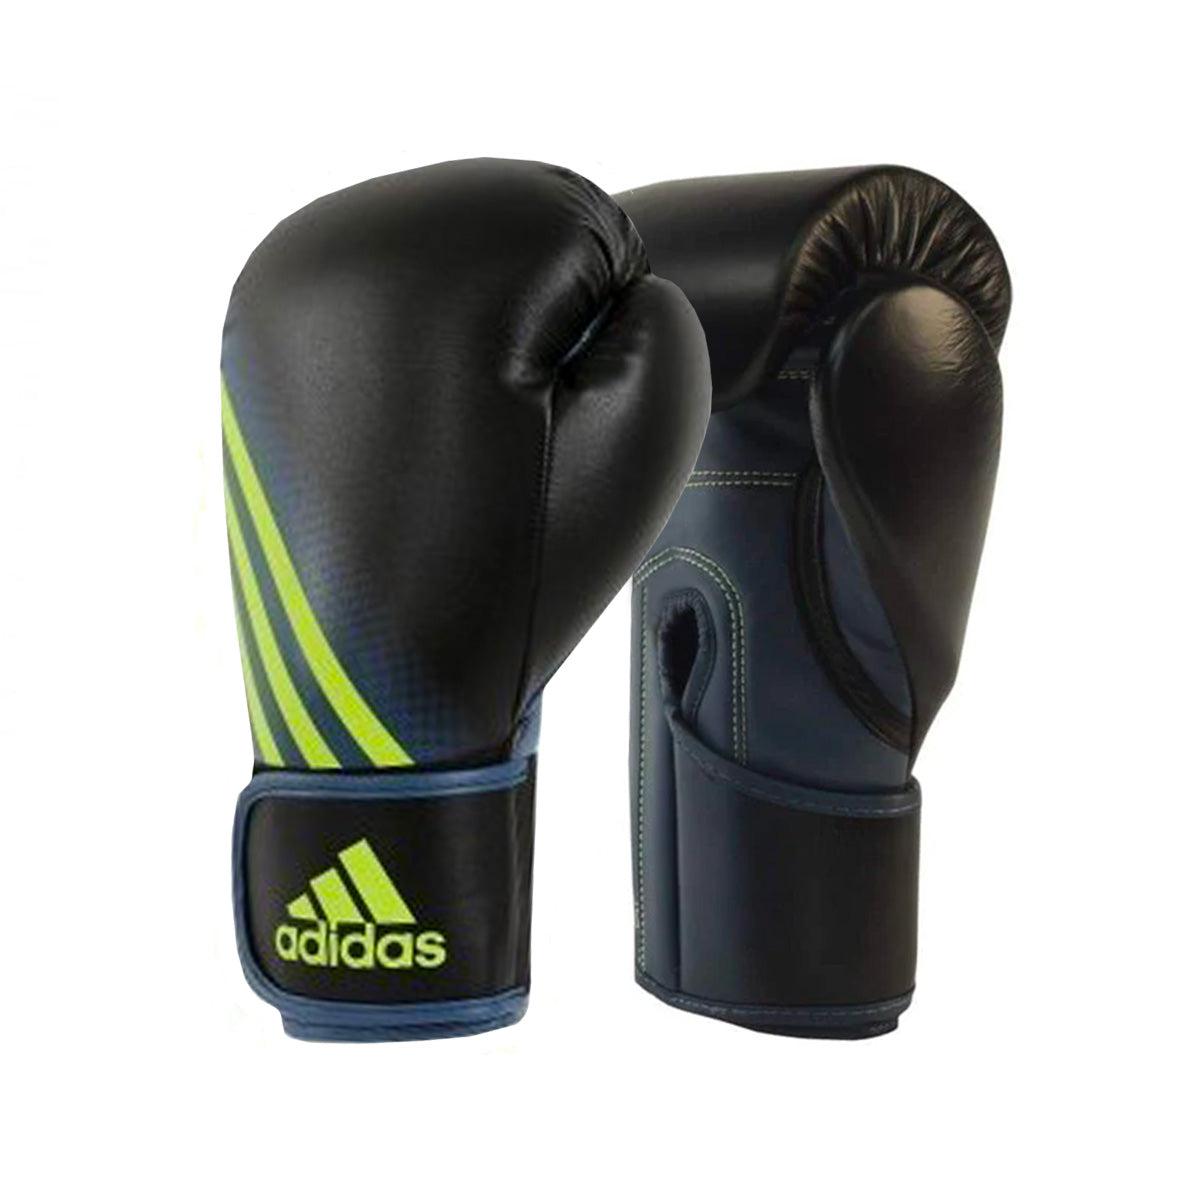 Adidas Junior Boxing Gloves - SPEED 100 Adidas® Boxing Gloves Canada Fighting